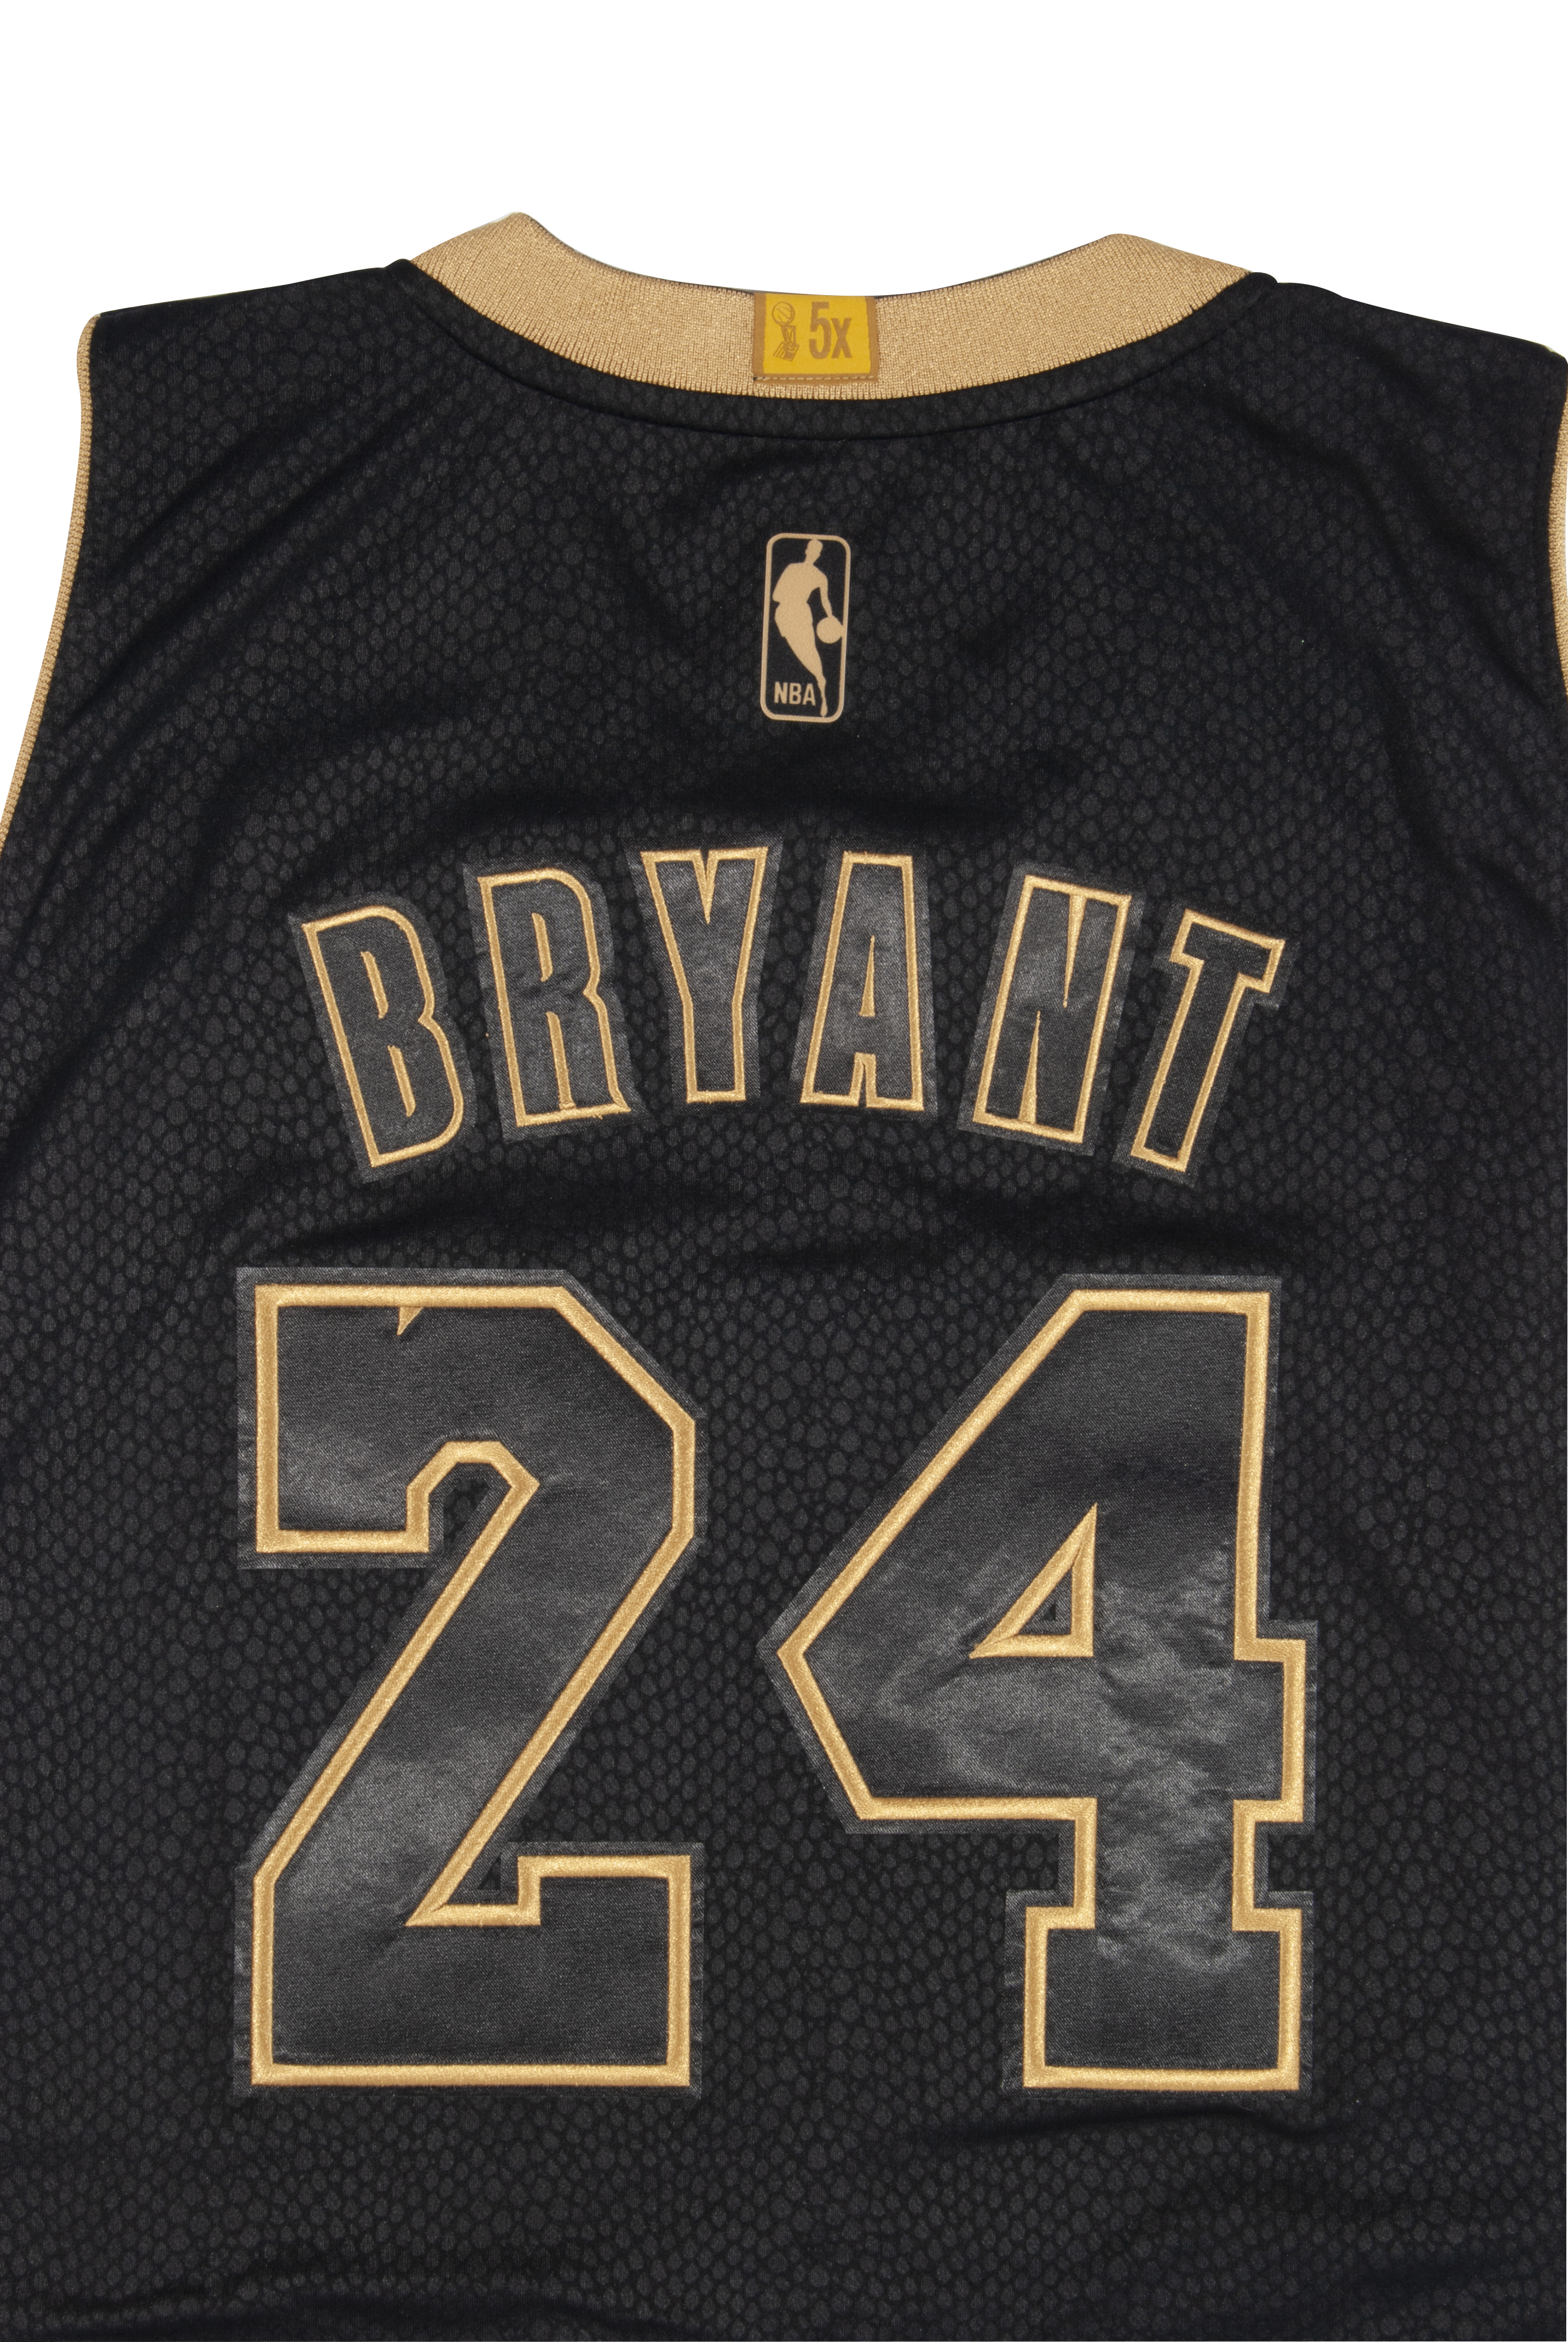 KOBE BRYANT Lakers #8 #24 Retirement Ceremony GIVEAWAY Jerseys 12/18/17  Staples